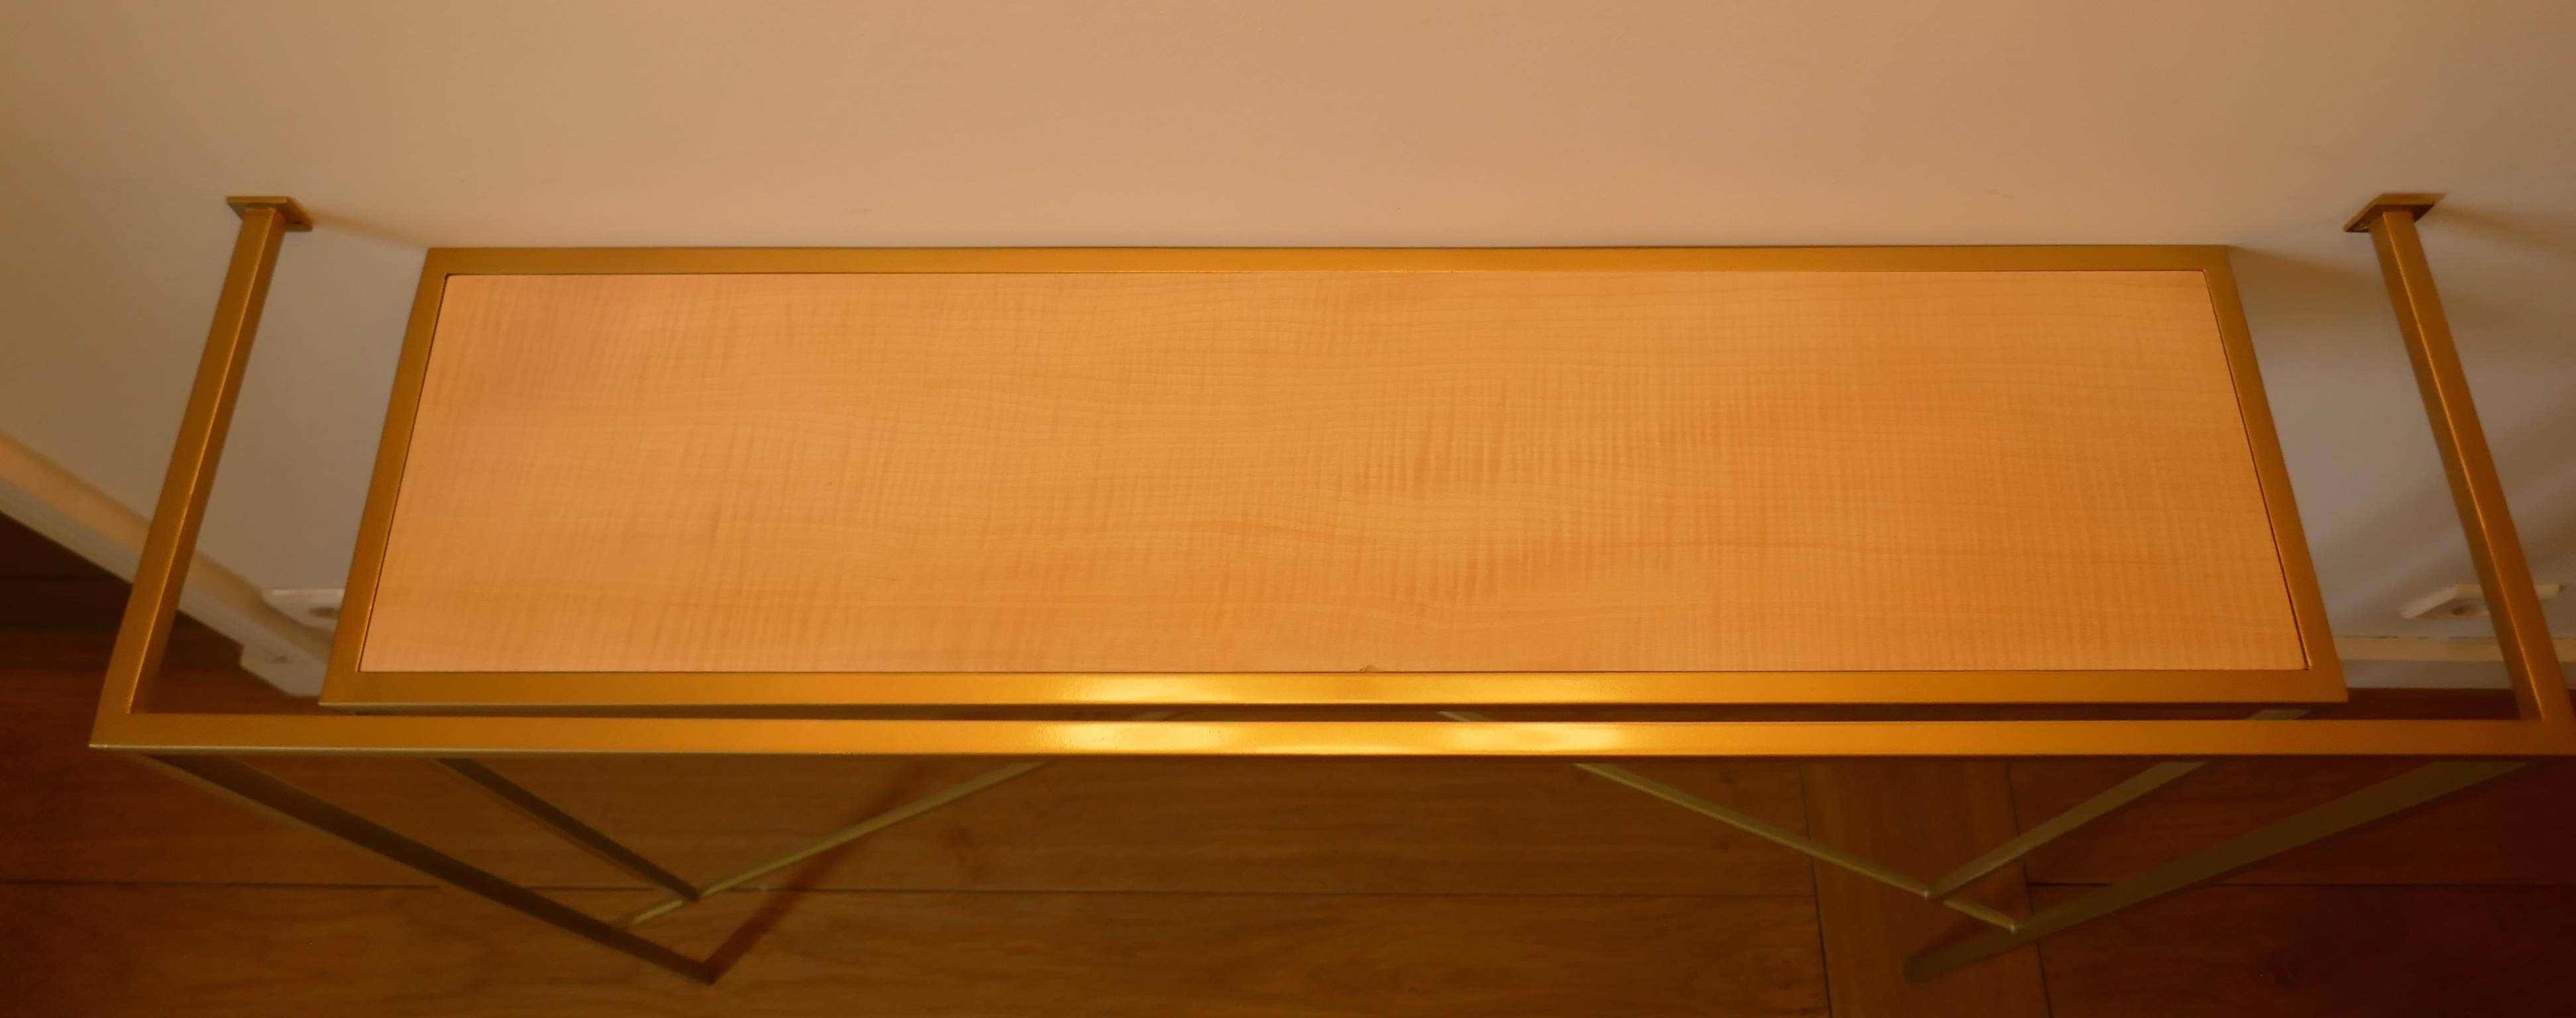 French Console in Gold, Bronze Brass Patina with One Sycamore Shelve by Aymeric Lefort